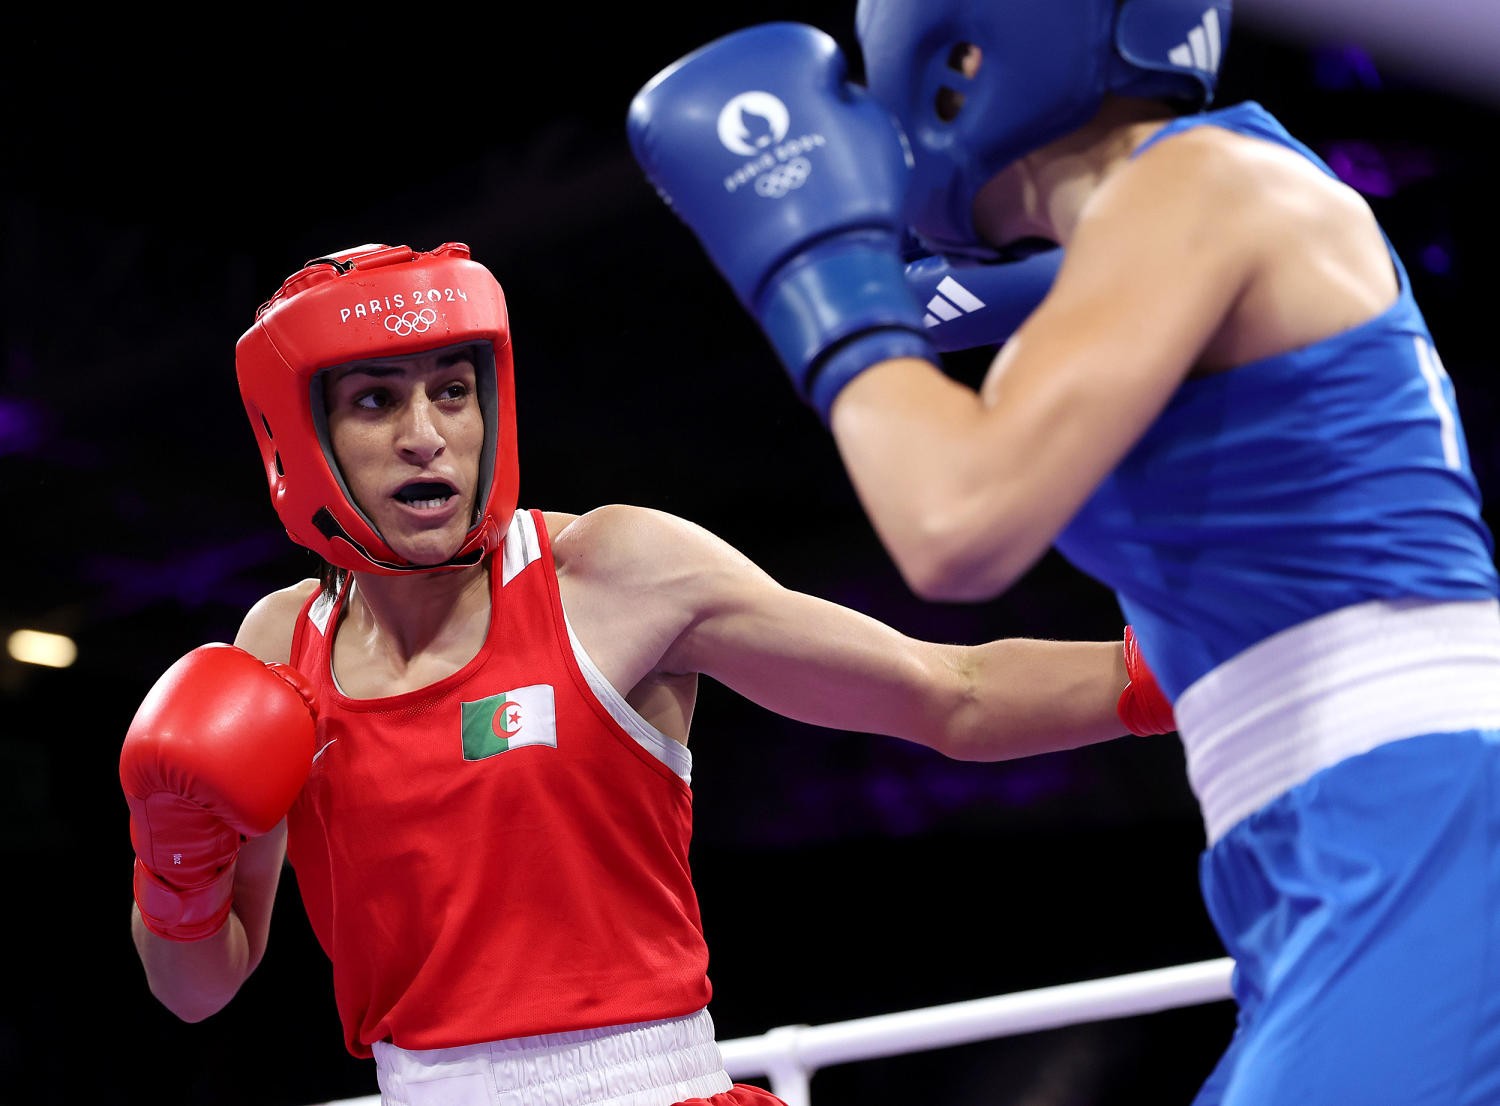 Boxer previously barred from women’s events wins fight after opponent quits in 46 seconds